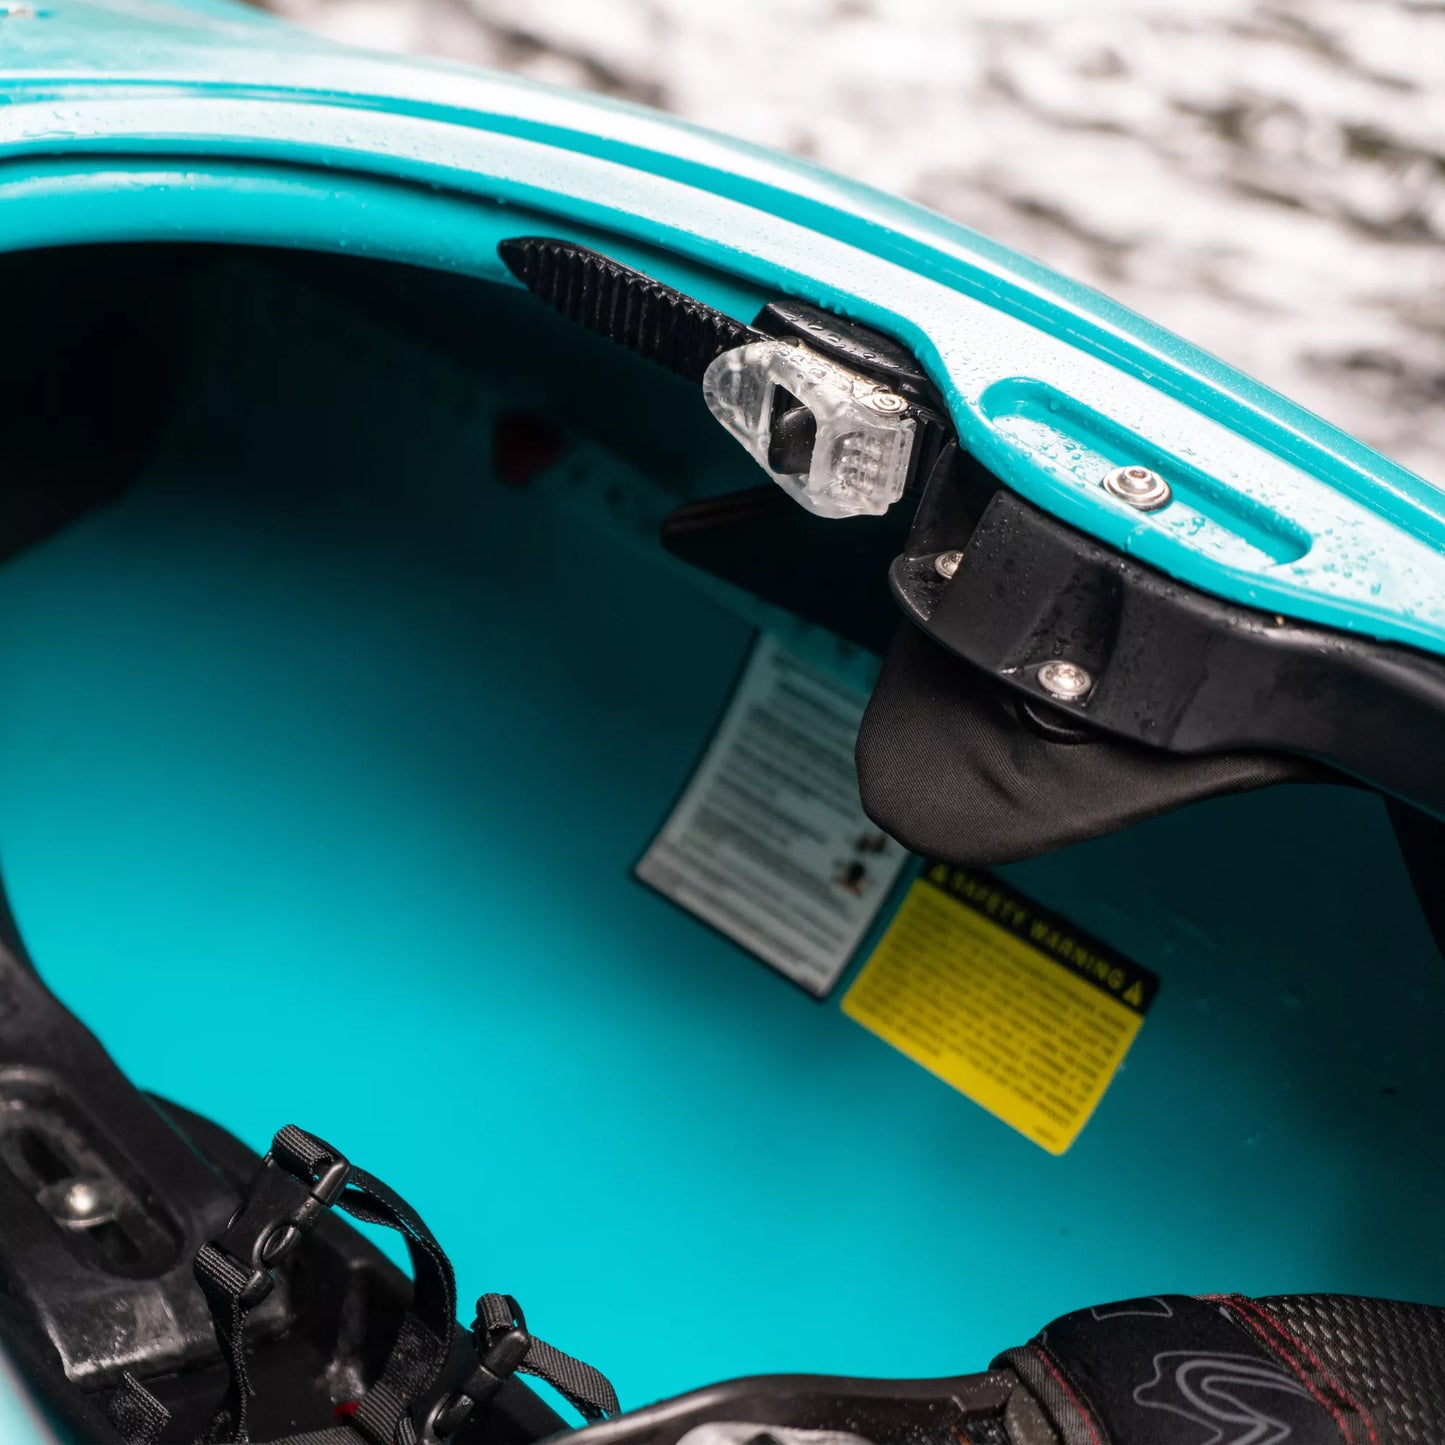 Close-up view of the interior of a blue Dagger Vanguard 12 kayak focusing on the seat adjustment mechanism.